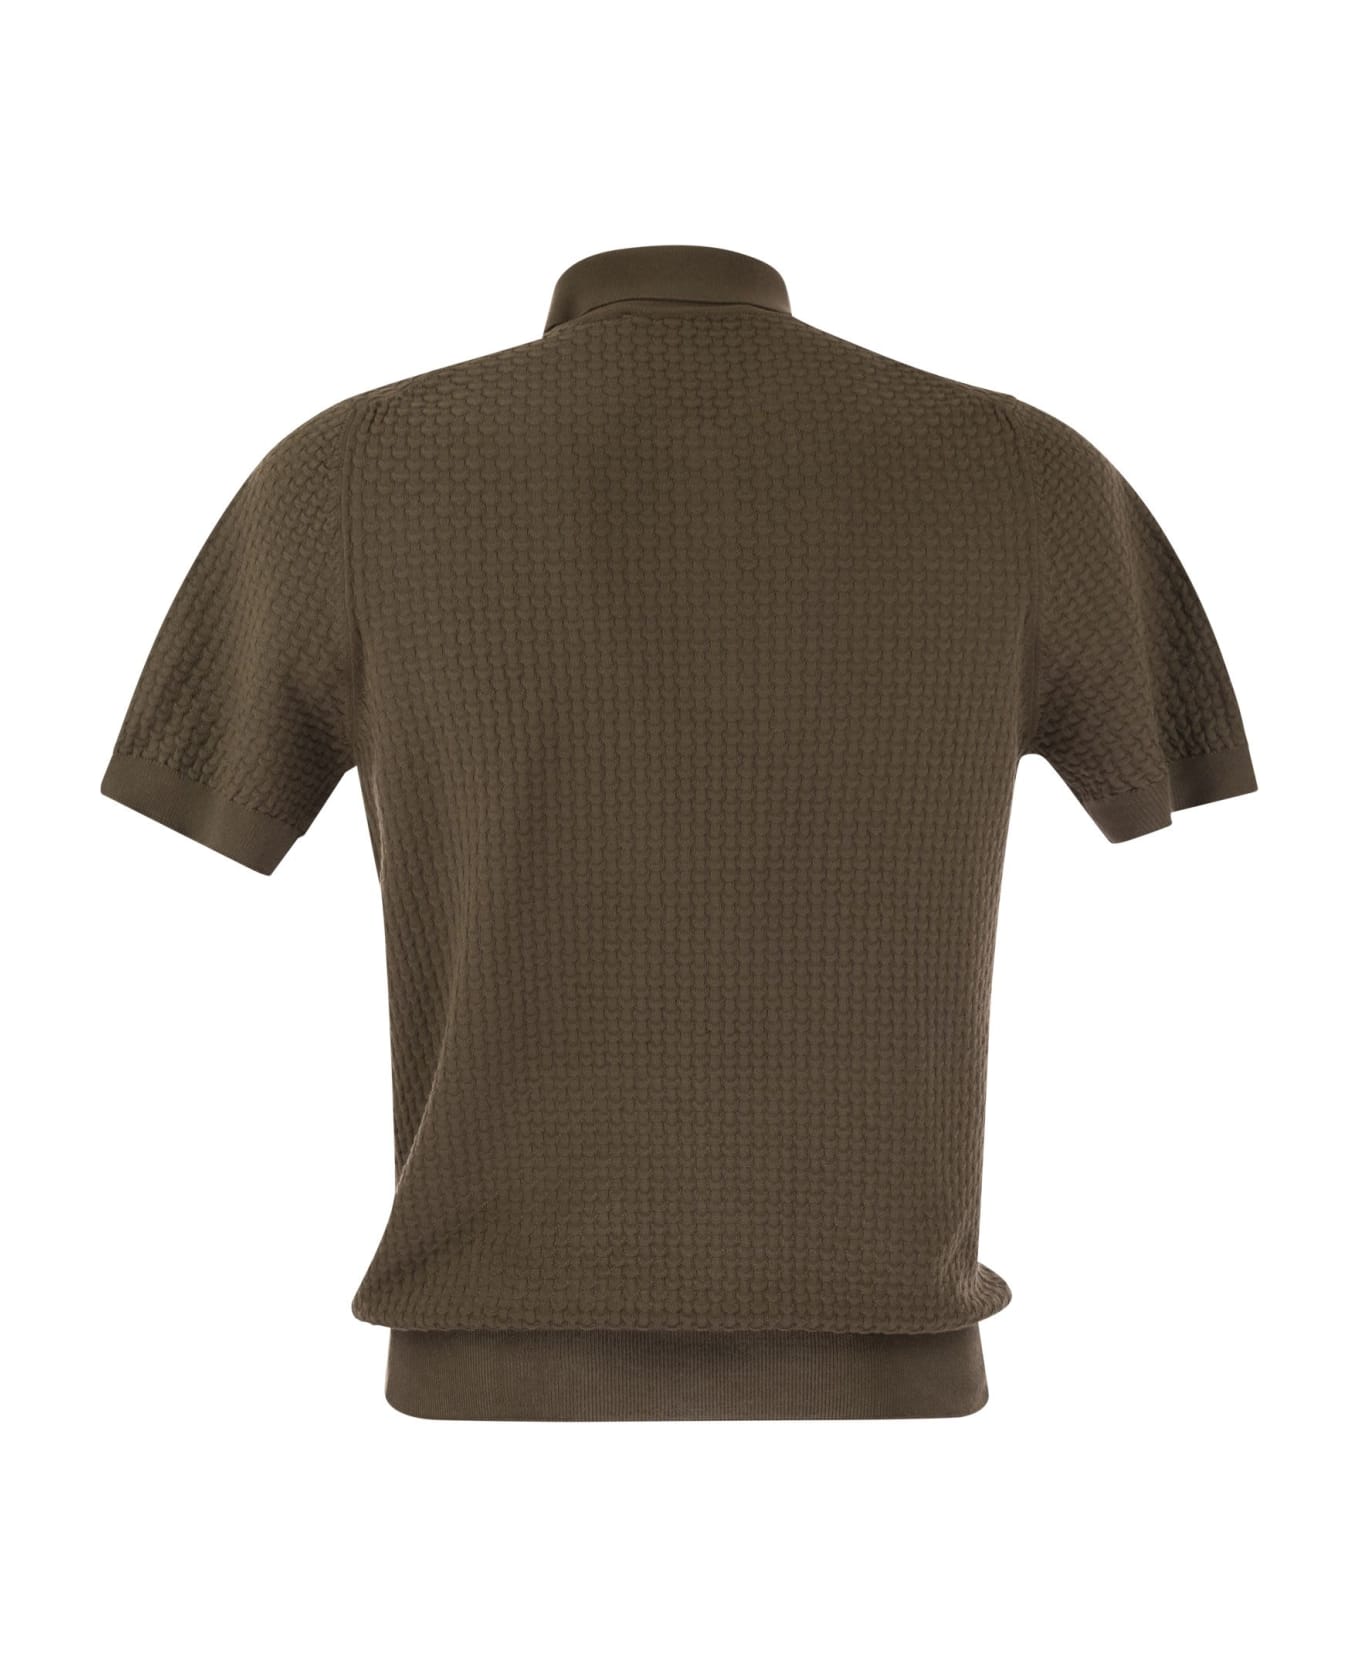 Tagliatore Knitted Cotton Polo Shirt - Brown ポロシャツ